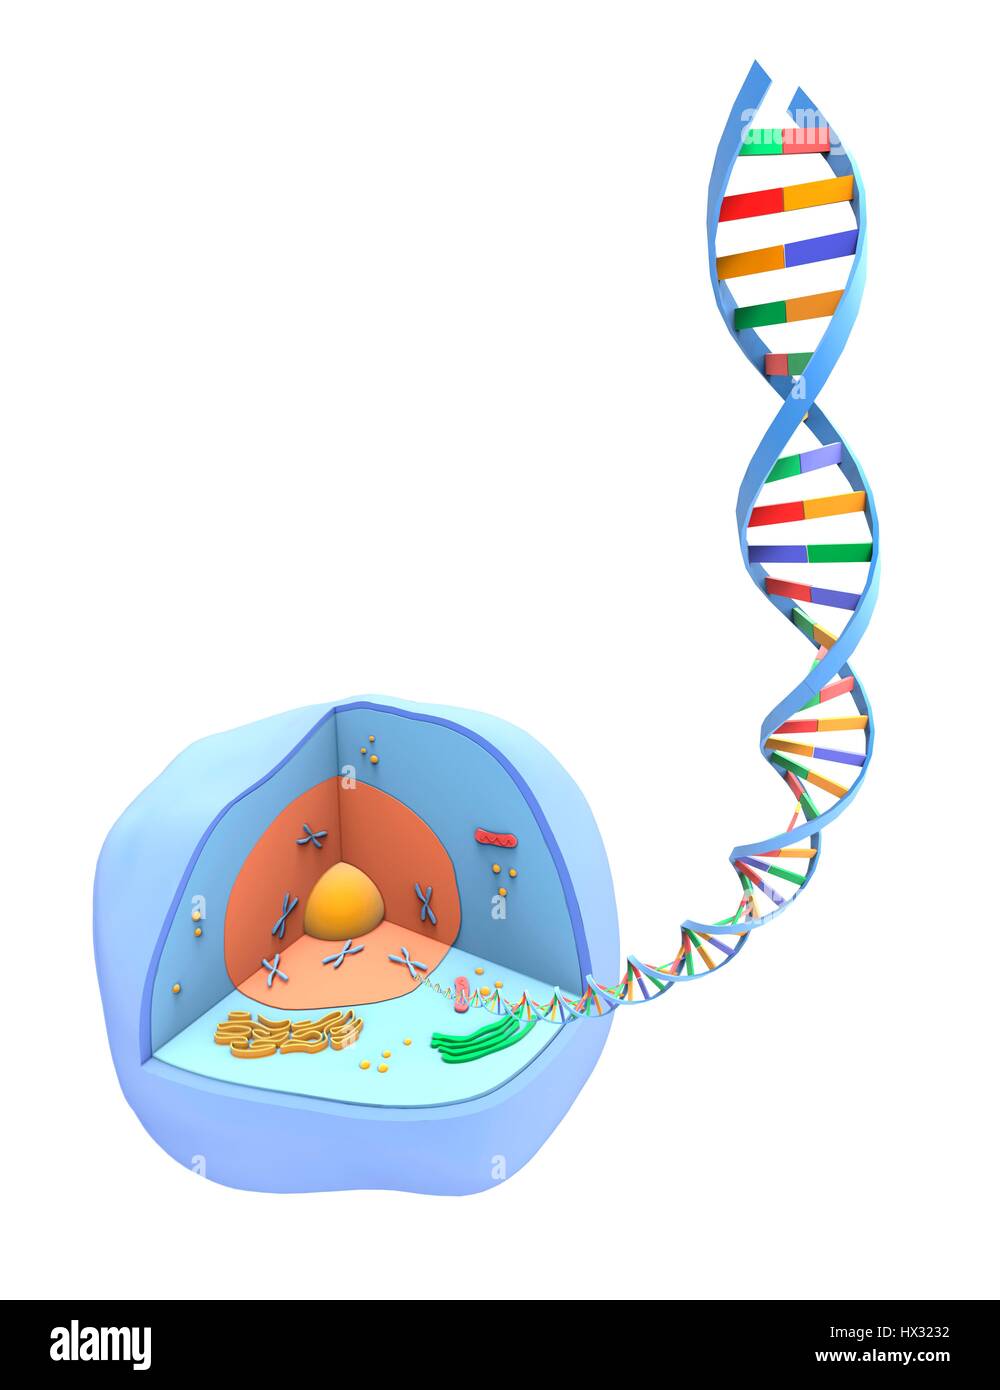 Computer artwork of a strand of the genetic material DNA (deoxyribonucleic acid) unwound from the nucleus (orange) of a human cell (blue). Stock Photo